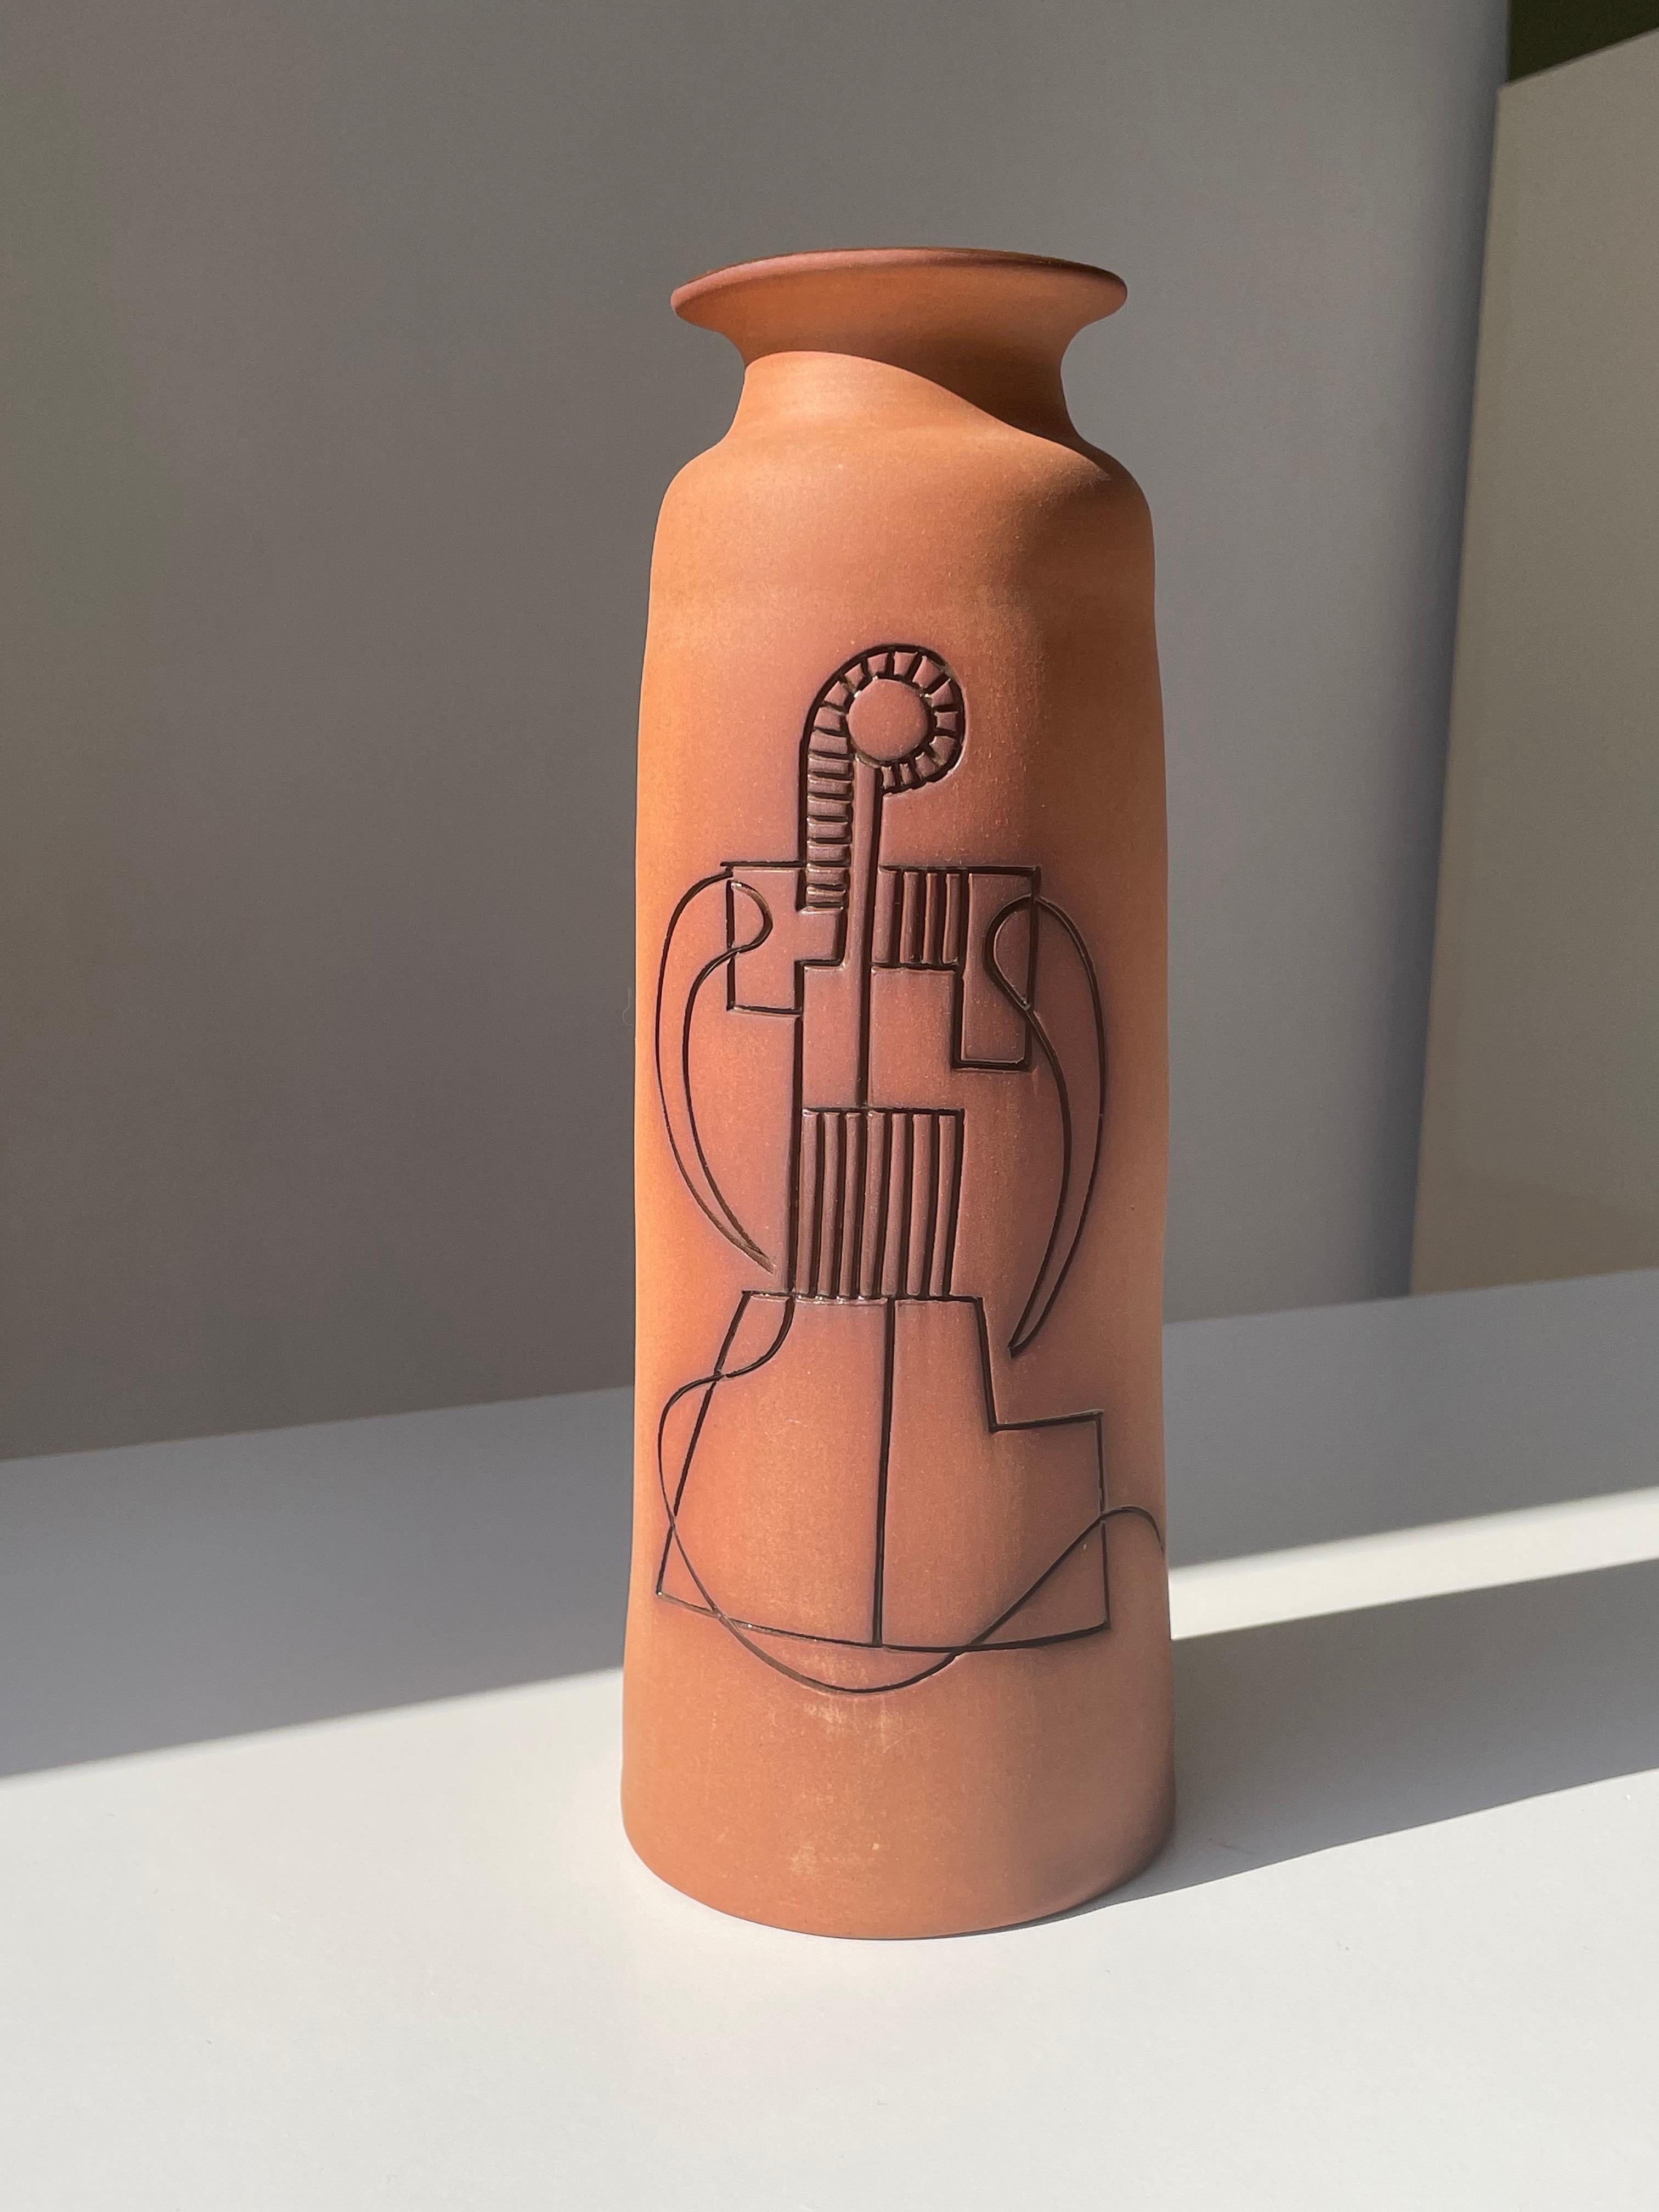 Tall contemporary minimalist ceramic vase handmade in Cyprus. Unglazed exterior with handcarved incised relief stylized organic decor with caramel brown glaze in the each graphic line. Shiny dark brown glaze on the inside. Signed under base.